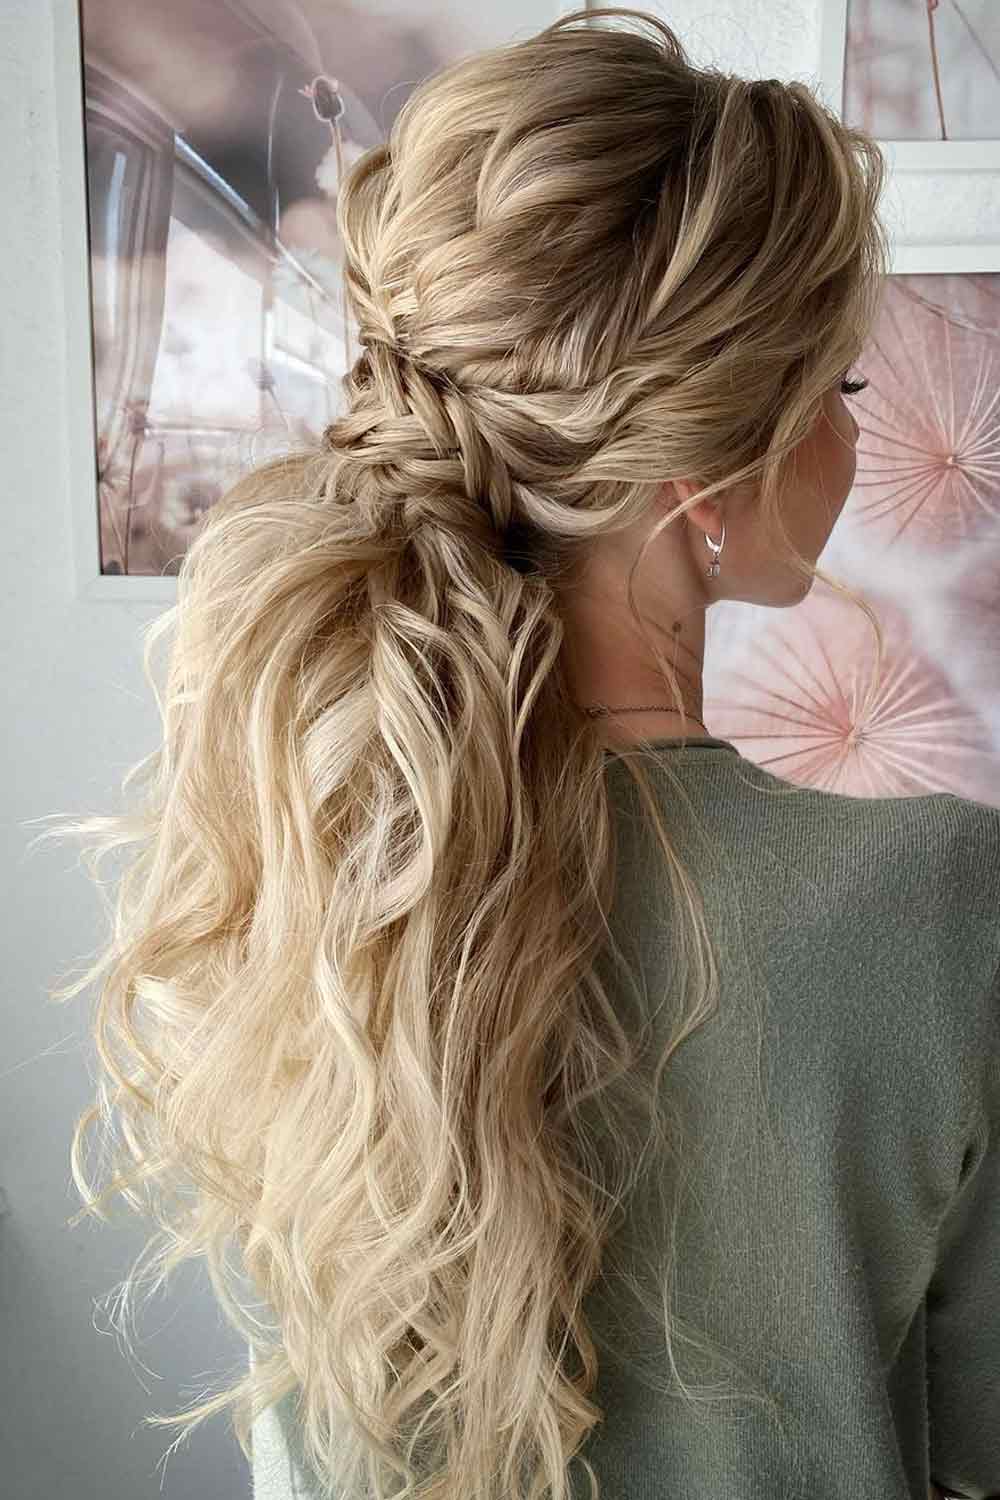 Ponytail Hairstyle with Braid